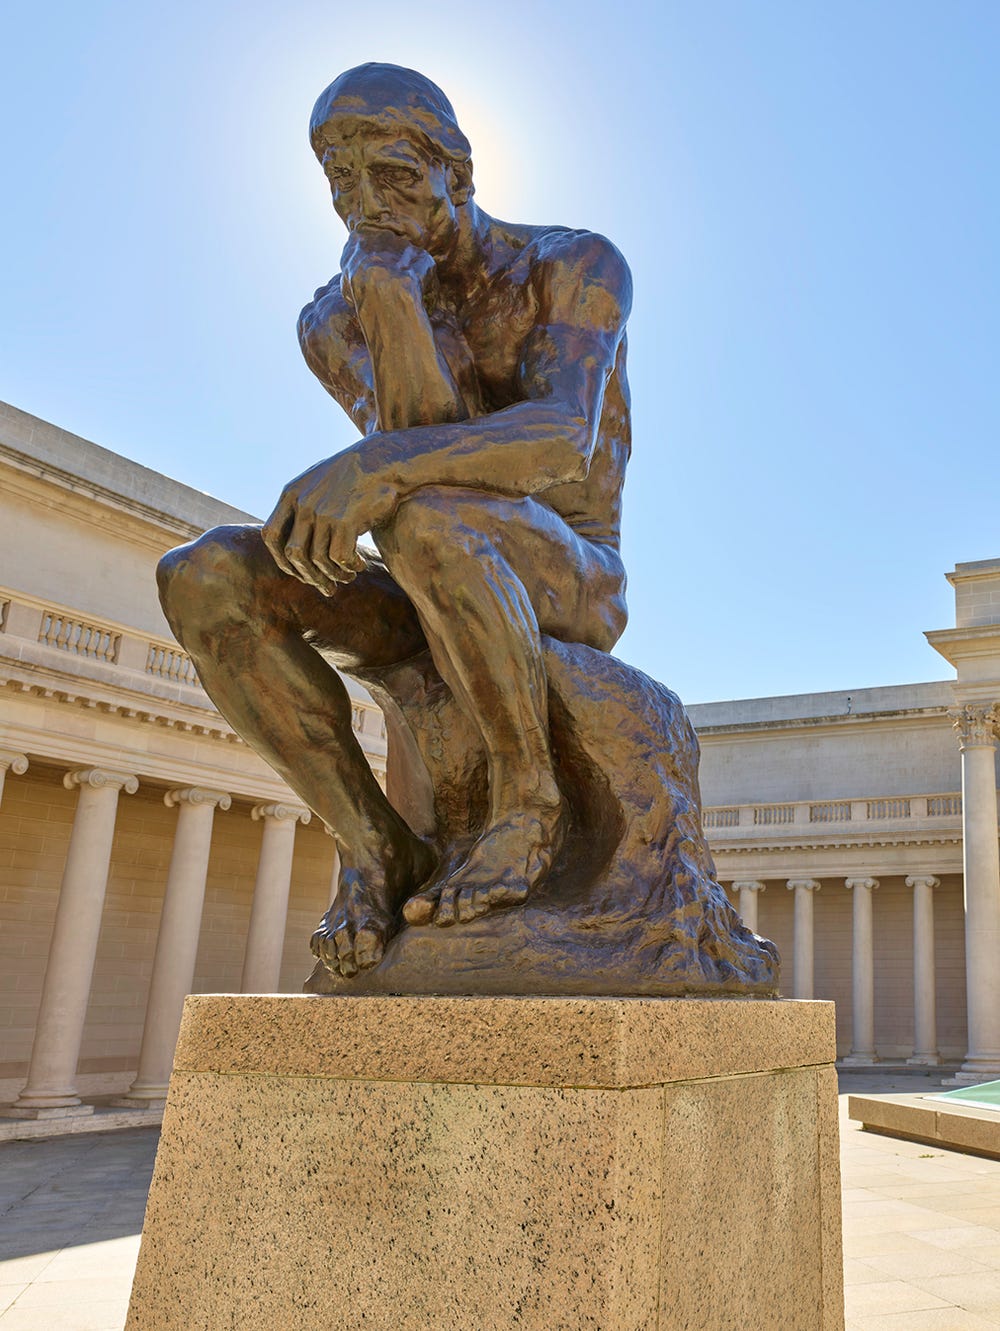 The Thinker at the Legion of Honor